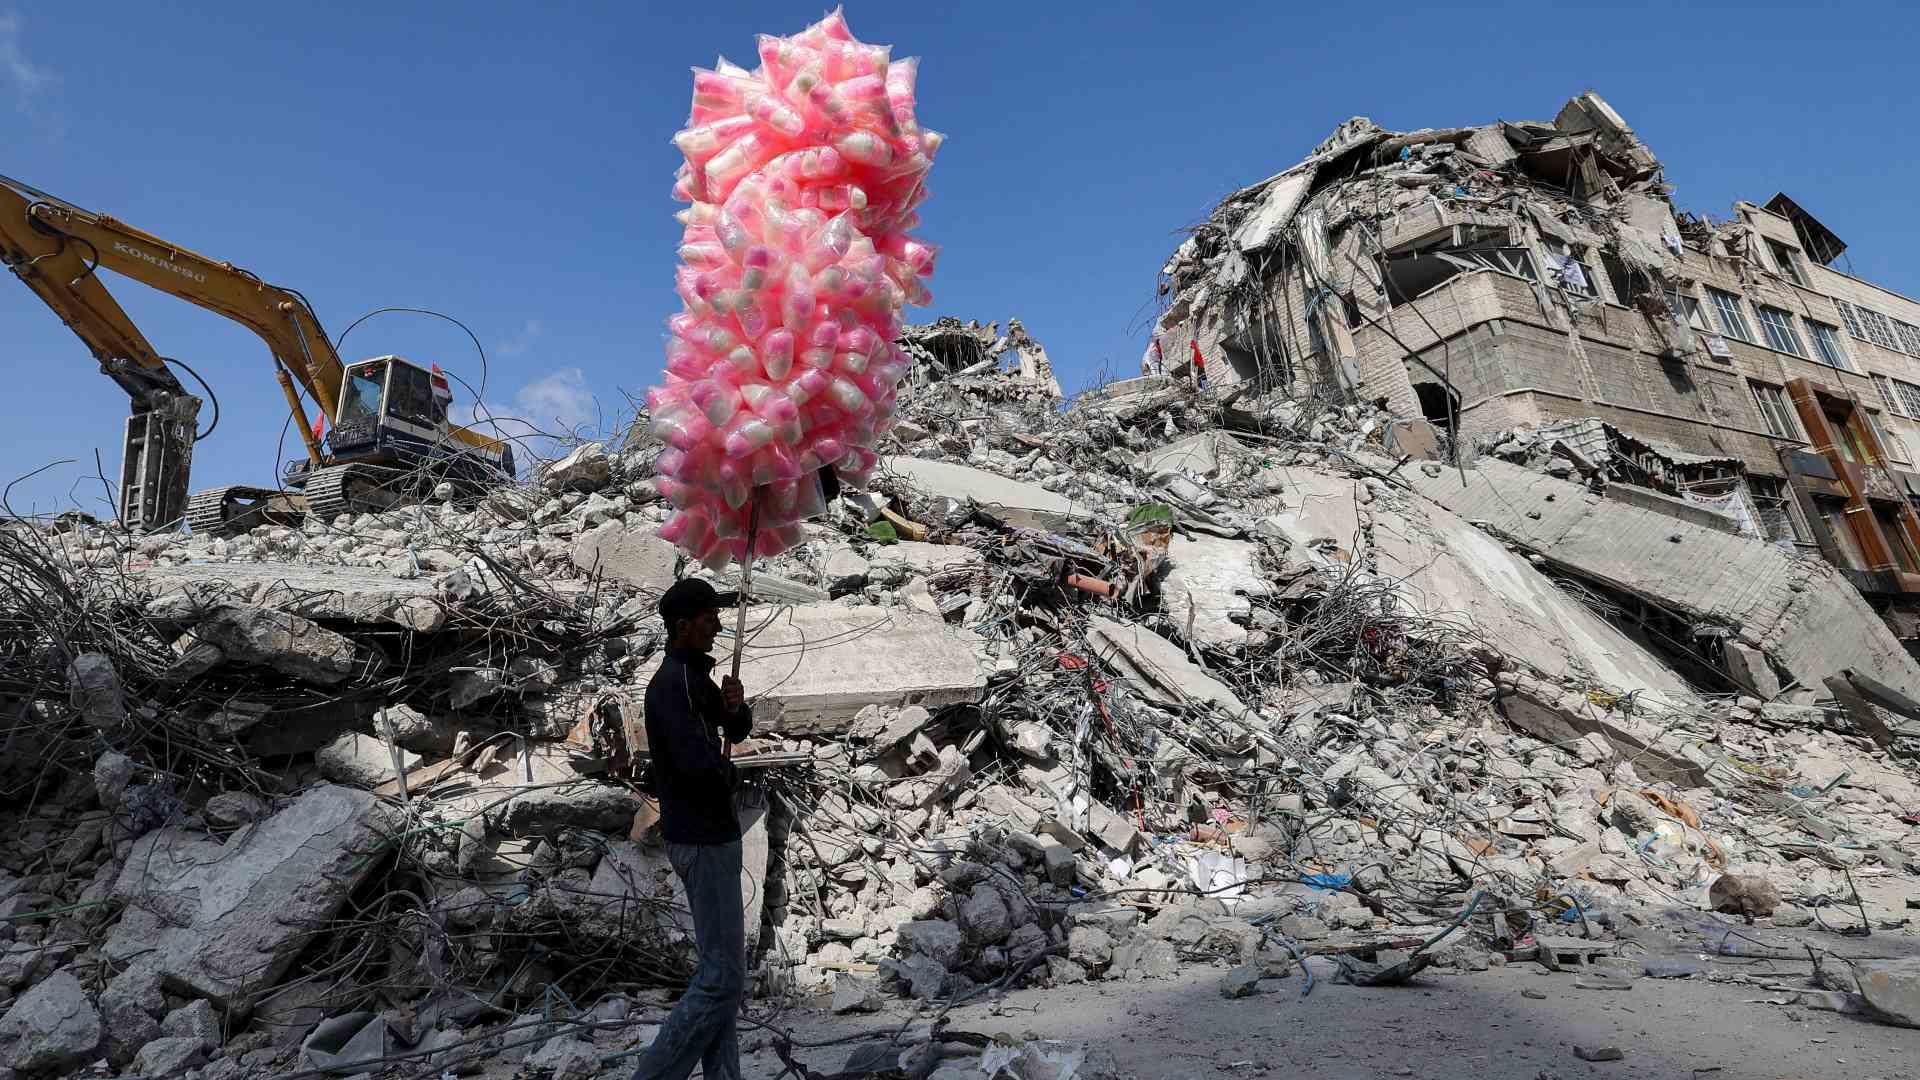 A Palestinian pedlar walks with bags of cotton candy past the rubble of a building destroyed during the May 2021 bombing of Gaza in Gaza City's al-Rimal neighbourhood, on 10 June 2021.